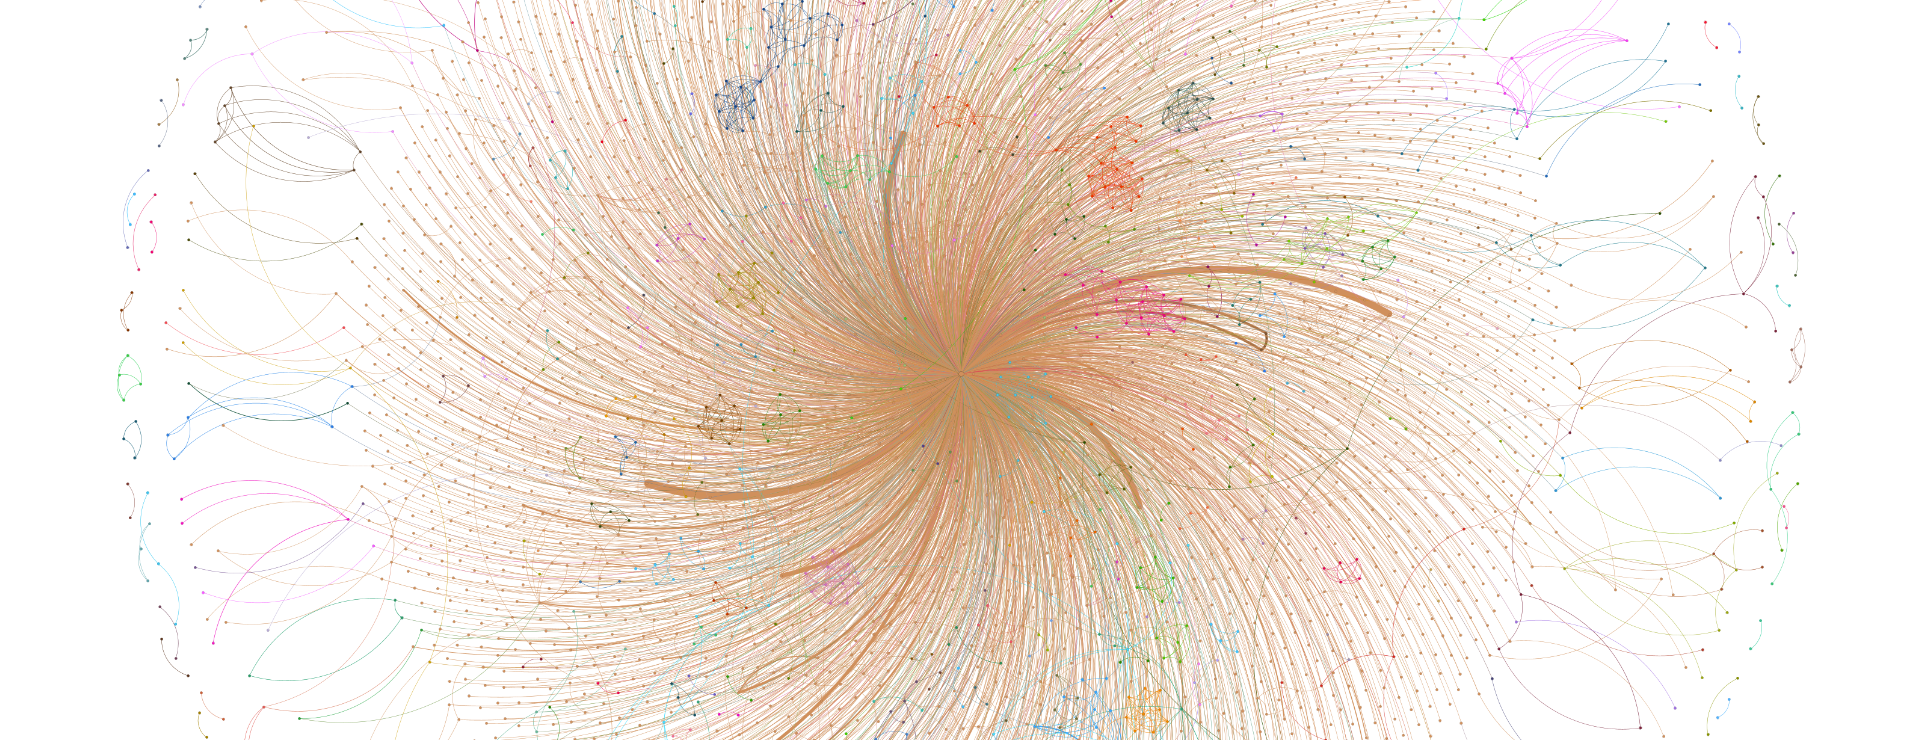 Visualizing The Network Of Facial Co-Occurrences Of A Year Of Russian TV News' 60 Minutes